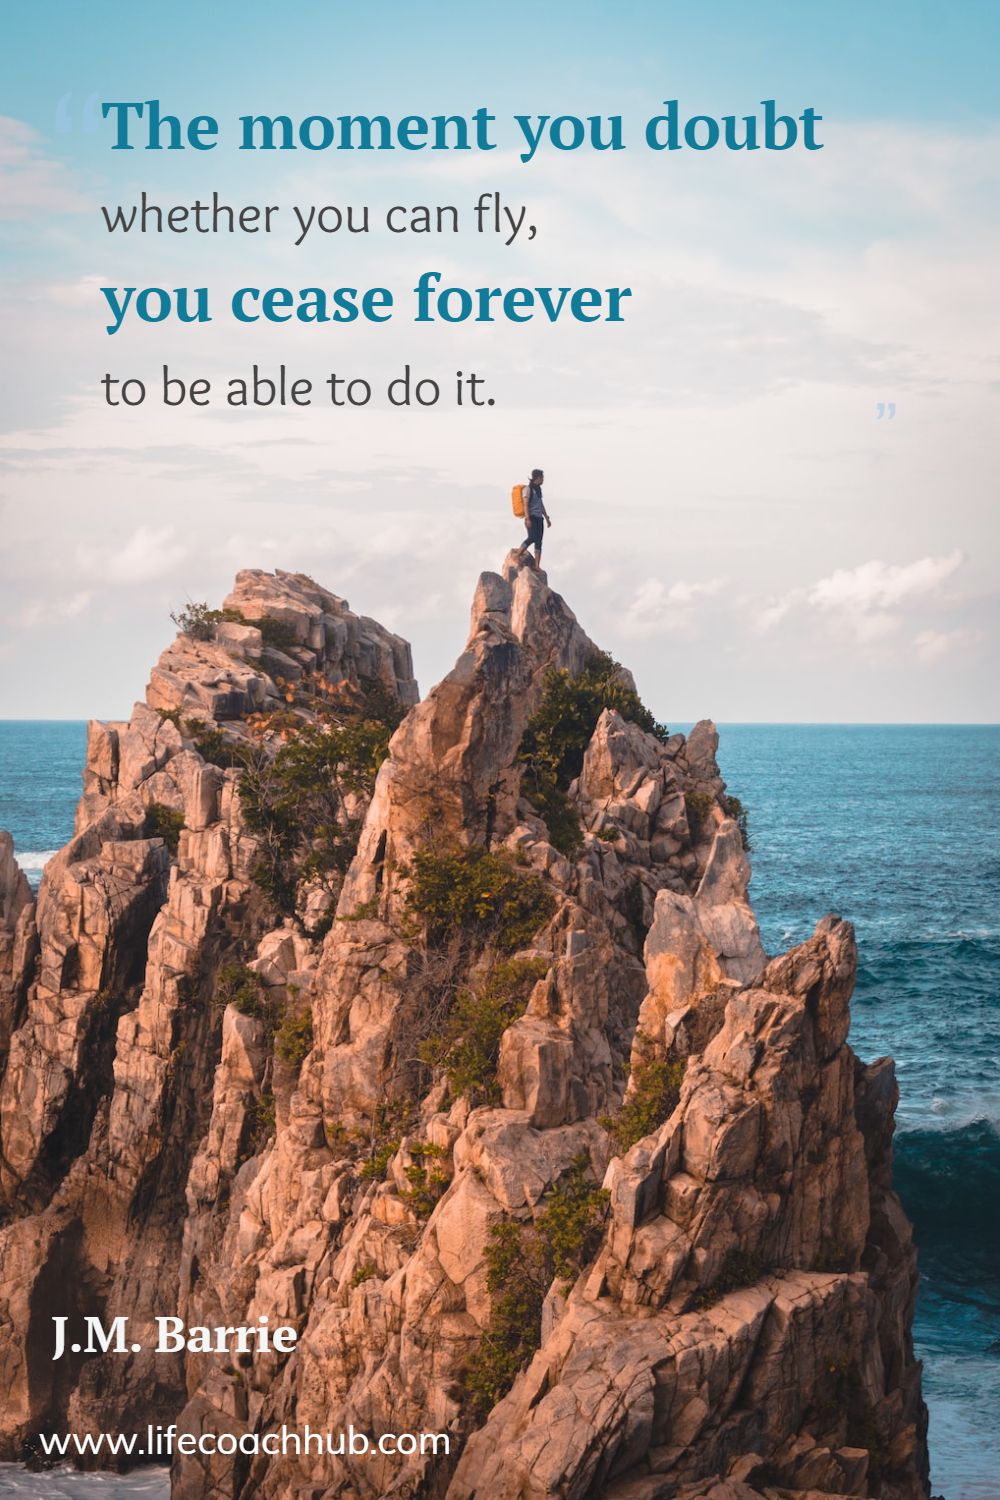 The moment you doubt whether you can fly, you cease forever to be able to do it. J.M. Barrie Coaching Quote